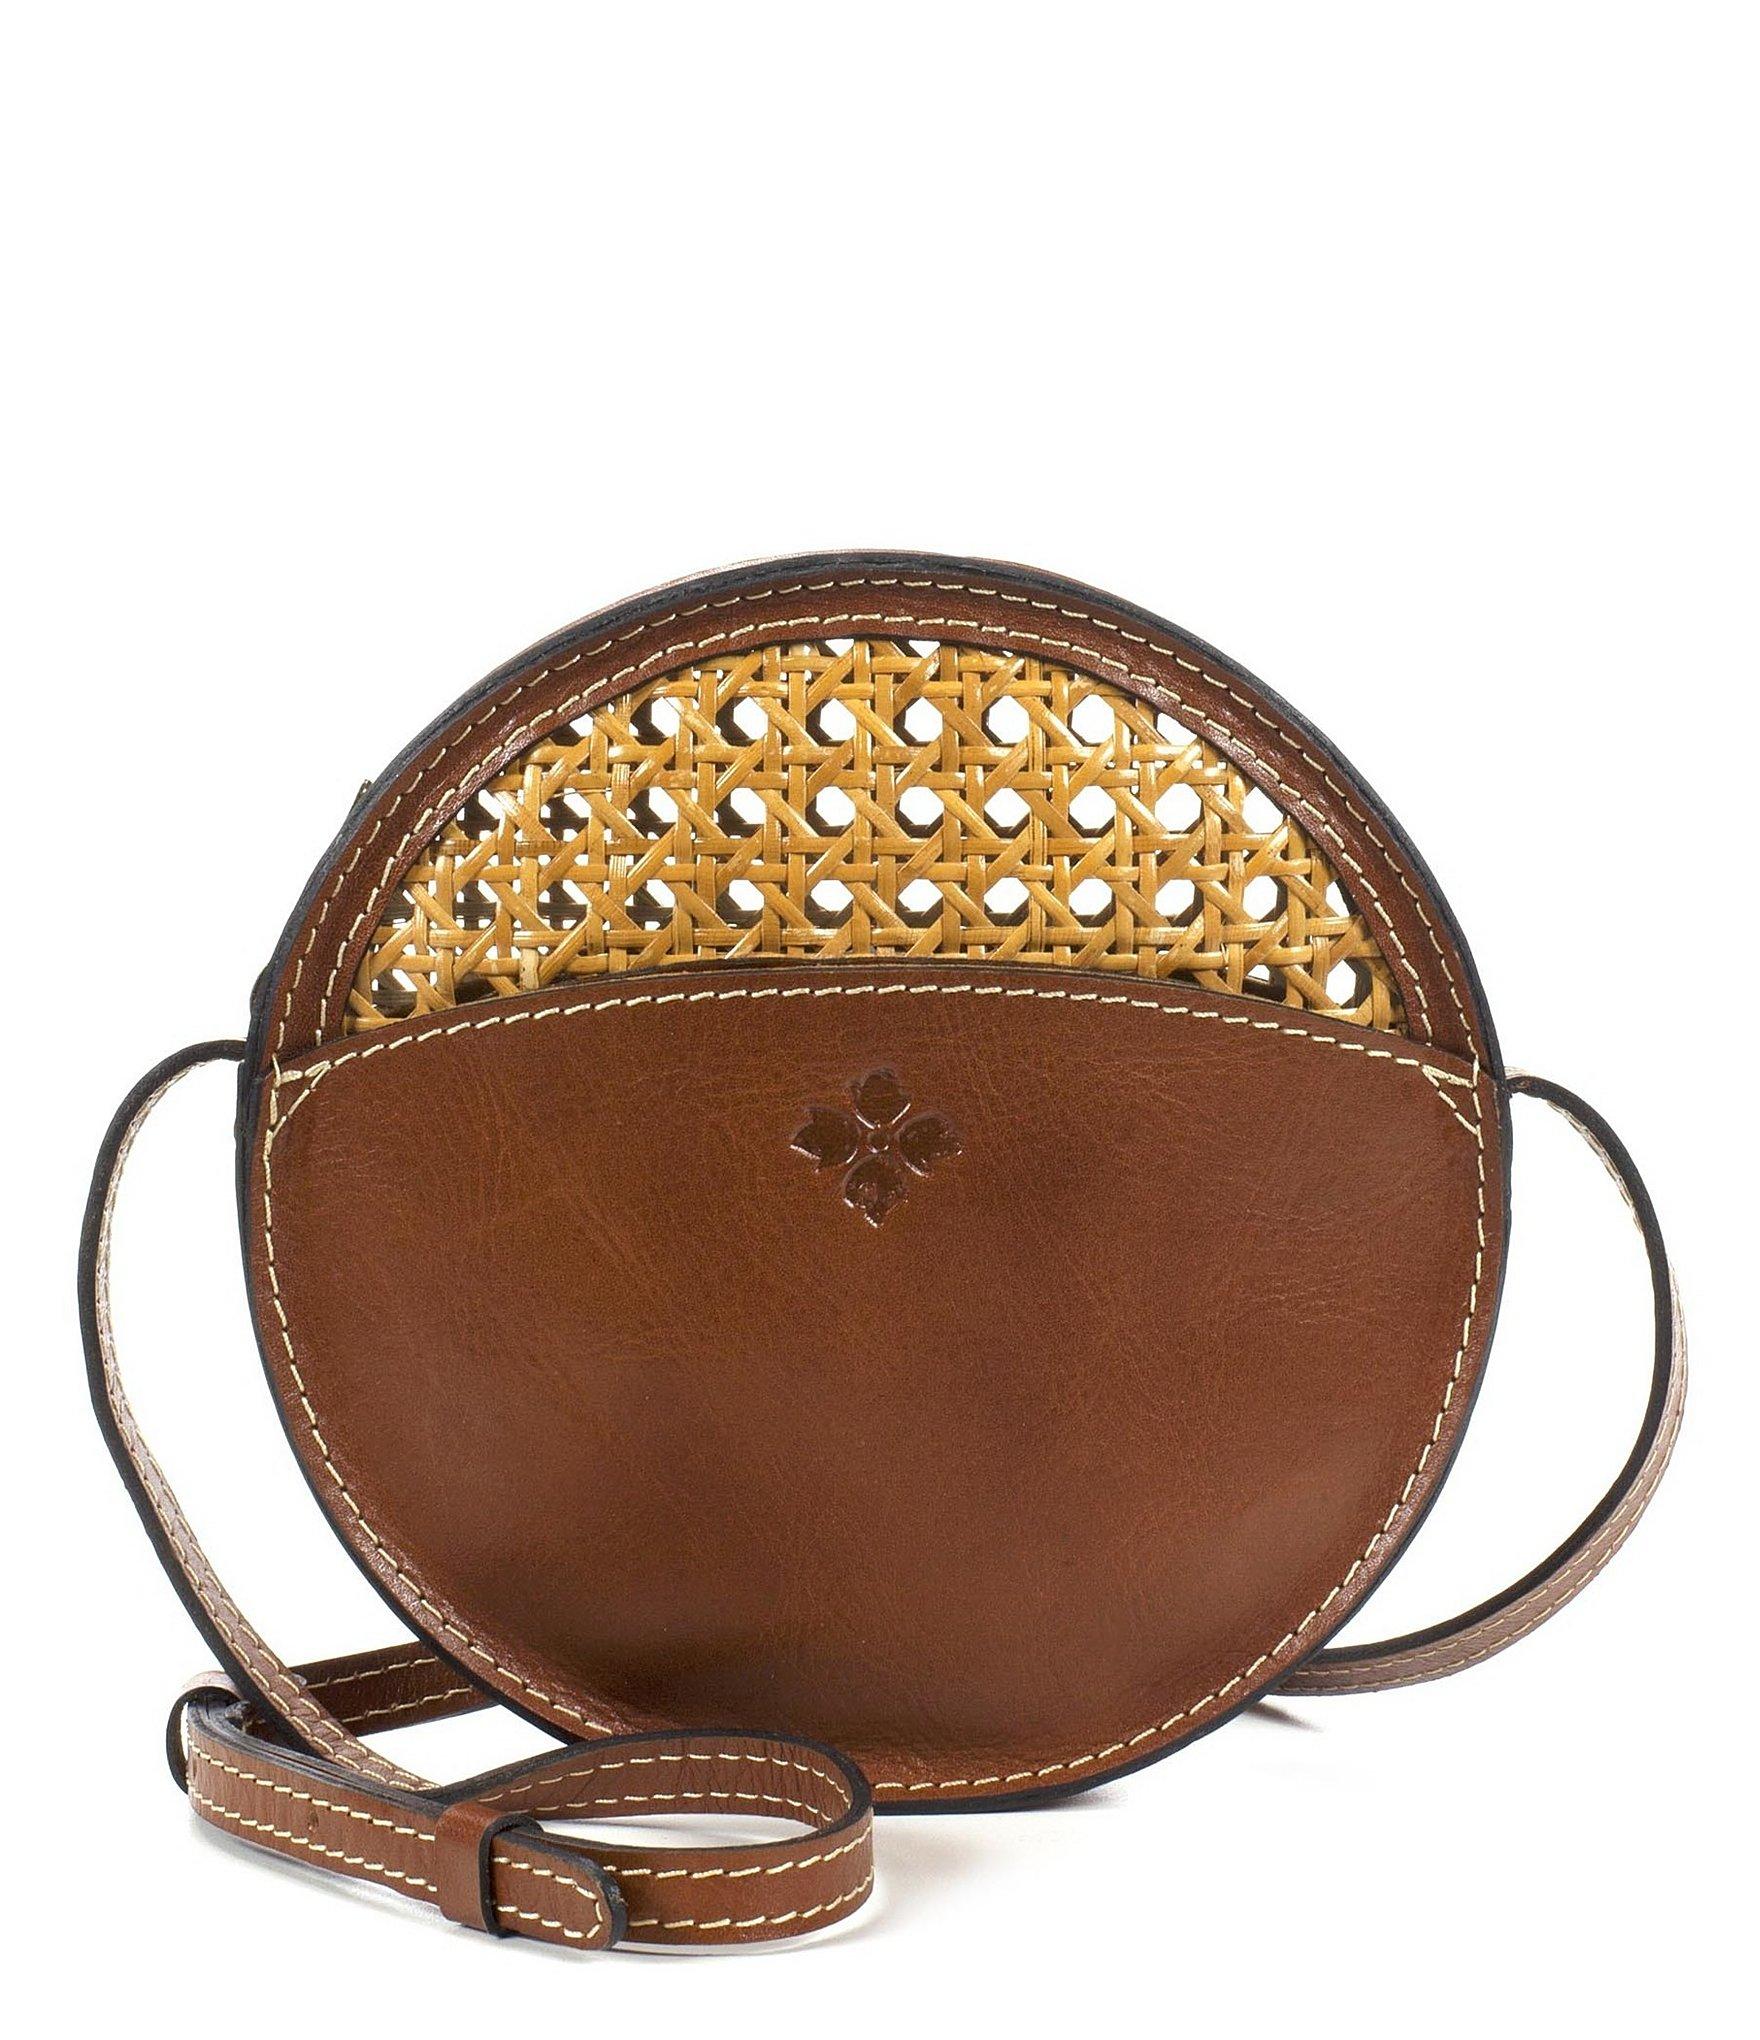 Lyst - Patricia nash Vintage Wicker Collection Scafati Round Cross-body Bag in Natural